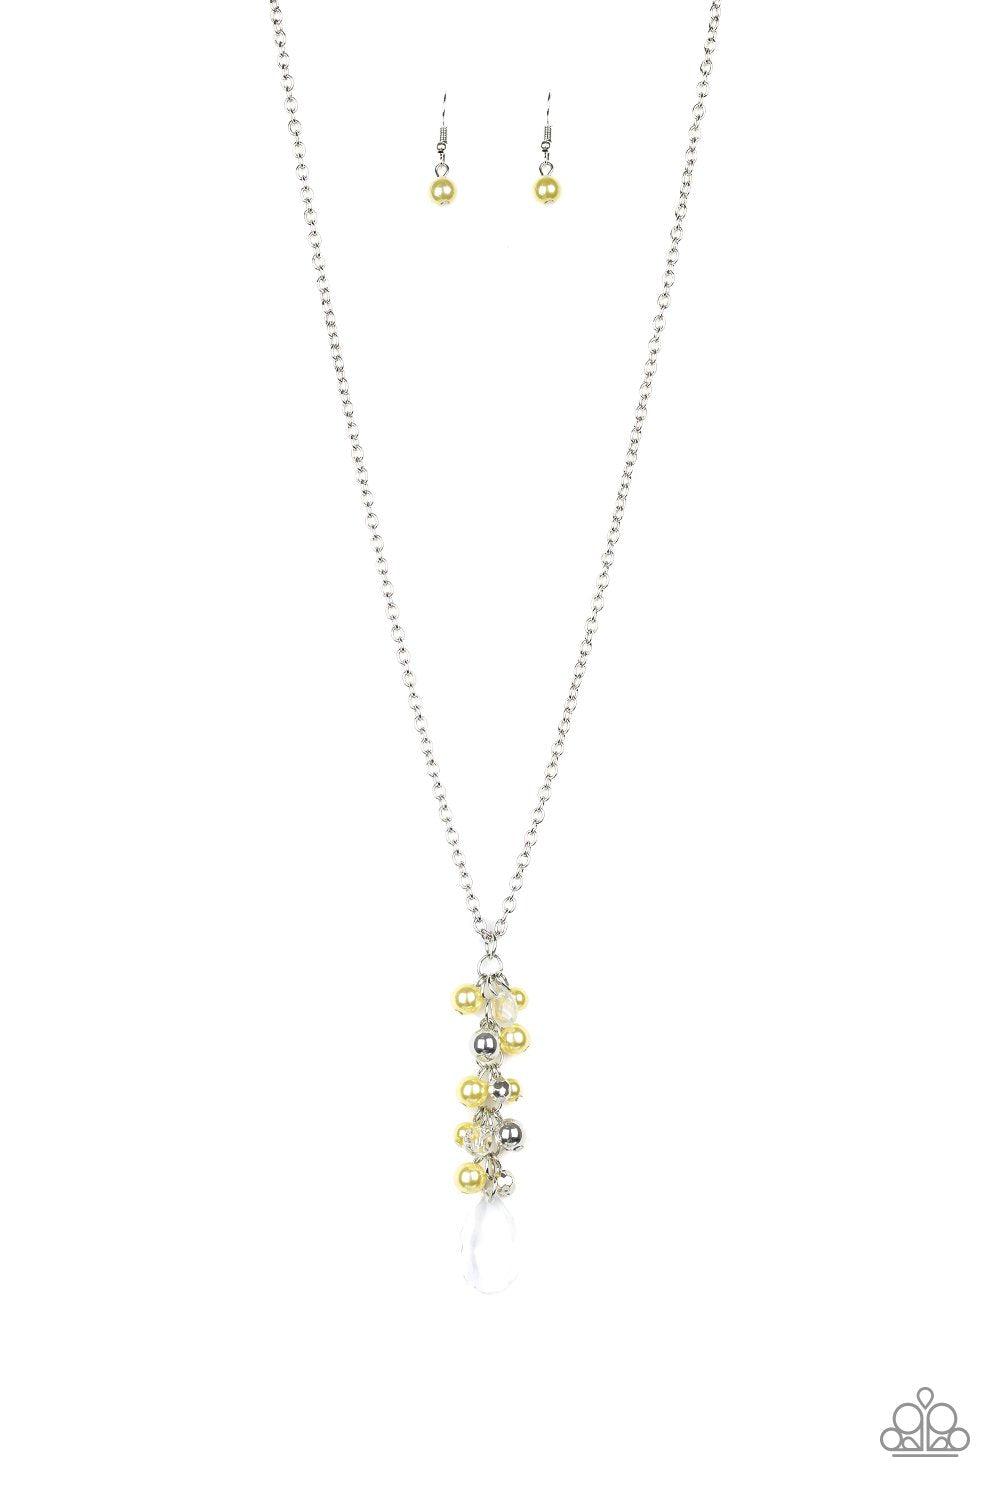 Teardrop Serenity Yellow Necklace - Paparazzi Accessories-CarasShop.com - $5 Jewelry by Cara Jewels